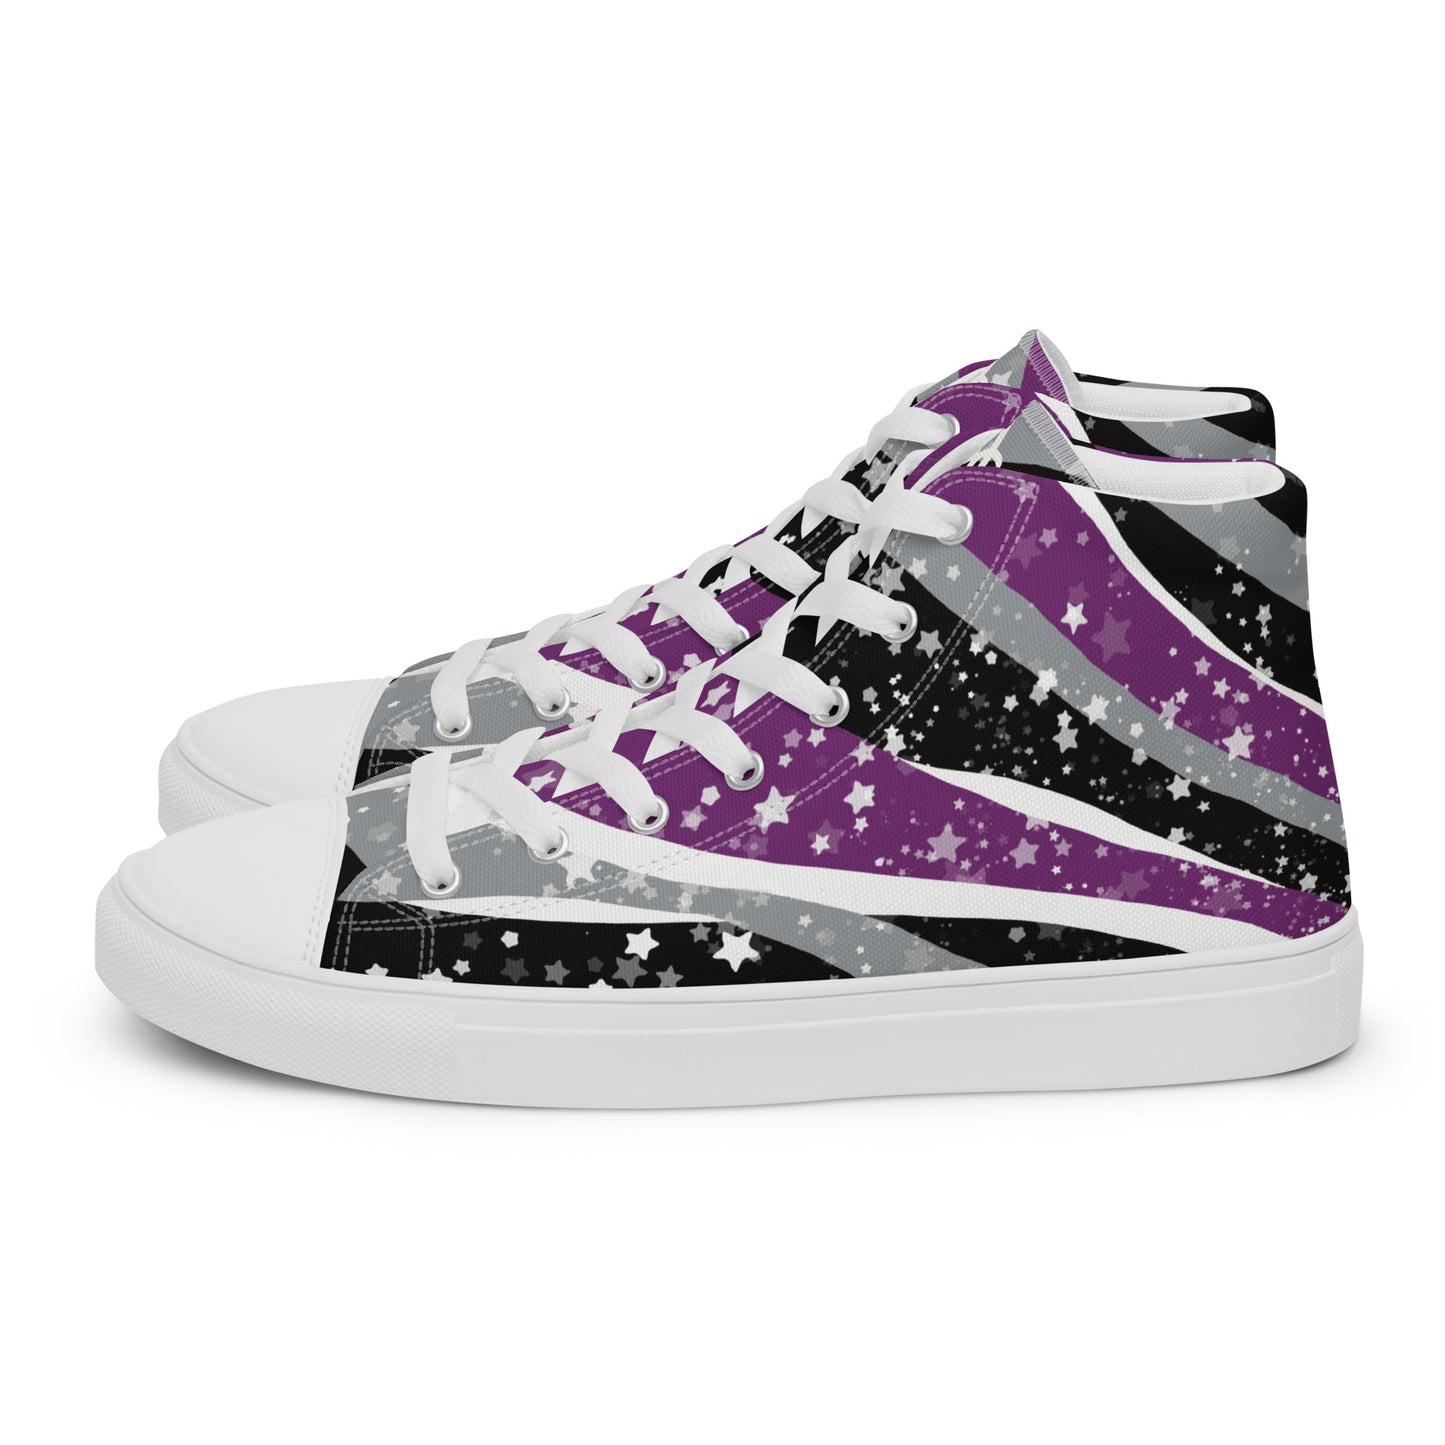 Left view: a pair of high-top shoes with ribbons of purple, grey, black, and white seem to expand from the heel to the laces with an explosion of stars.